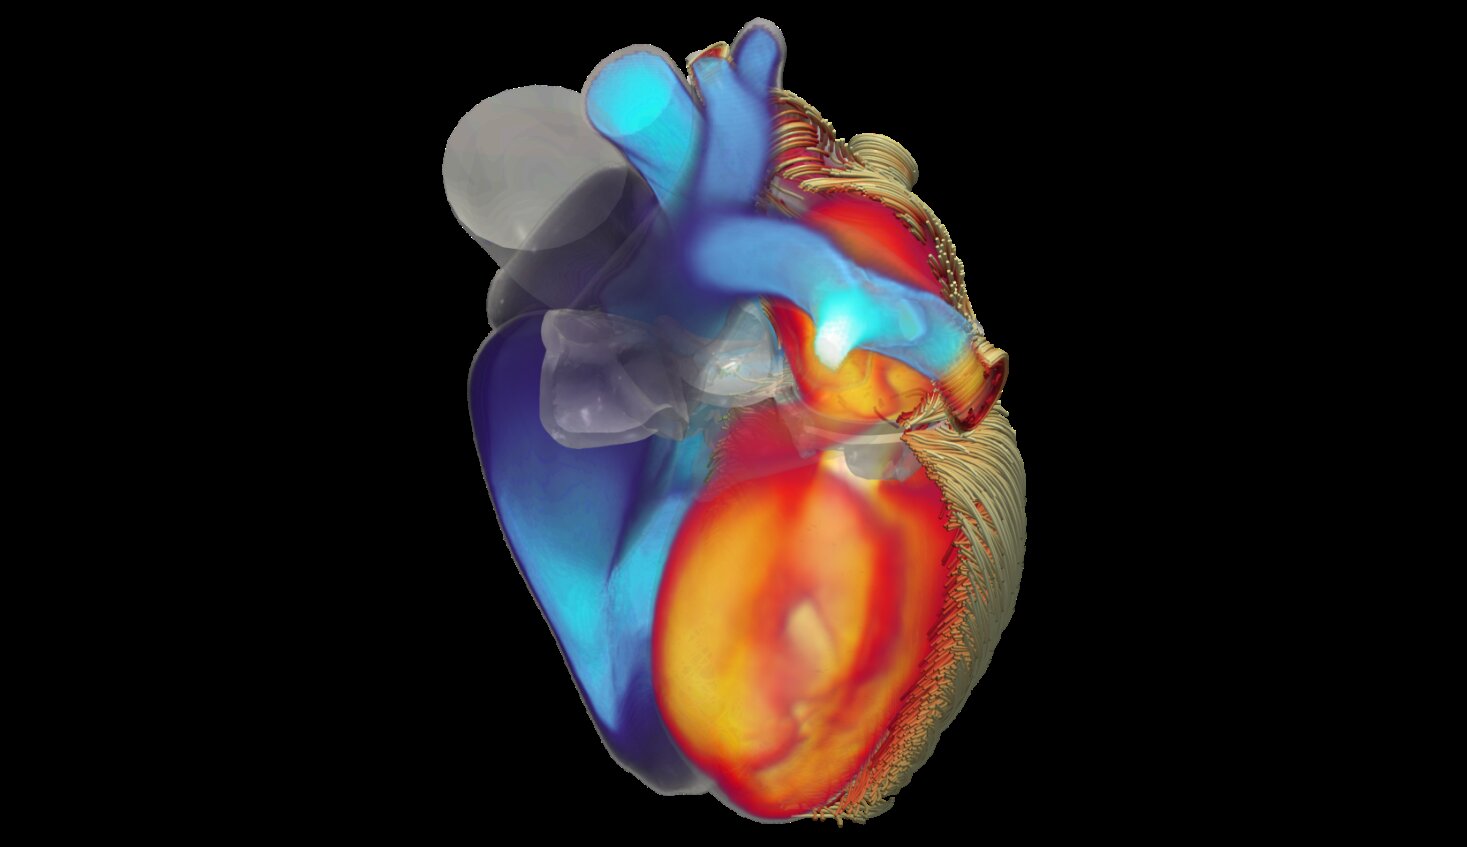 A mathematical model of the heart to revolutionize cardiac research